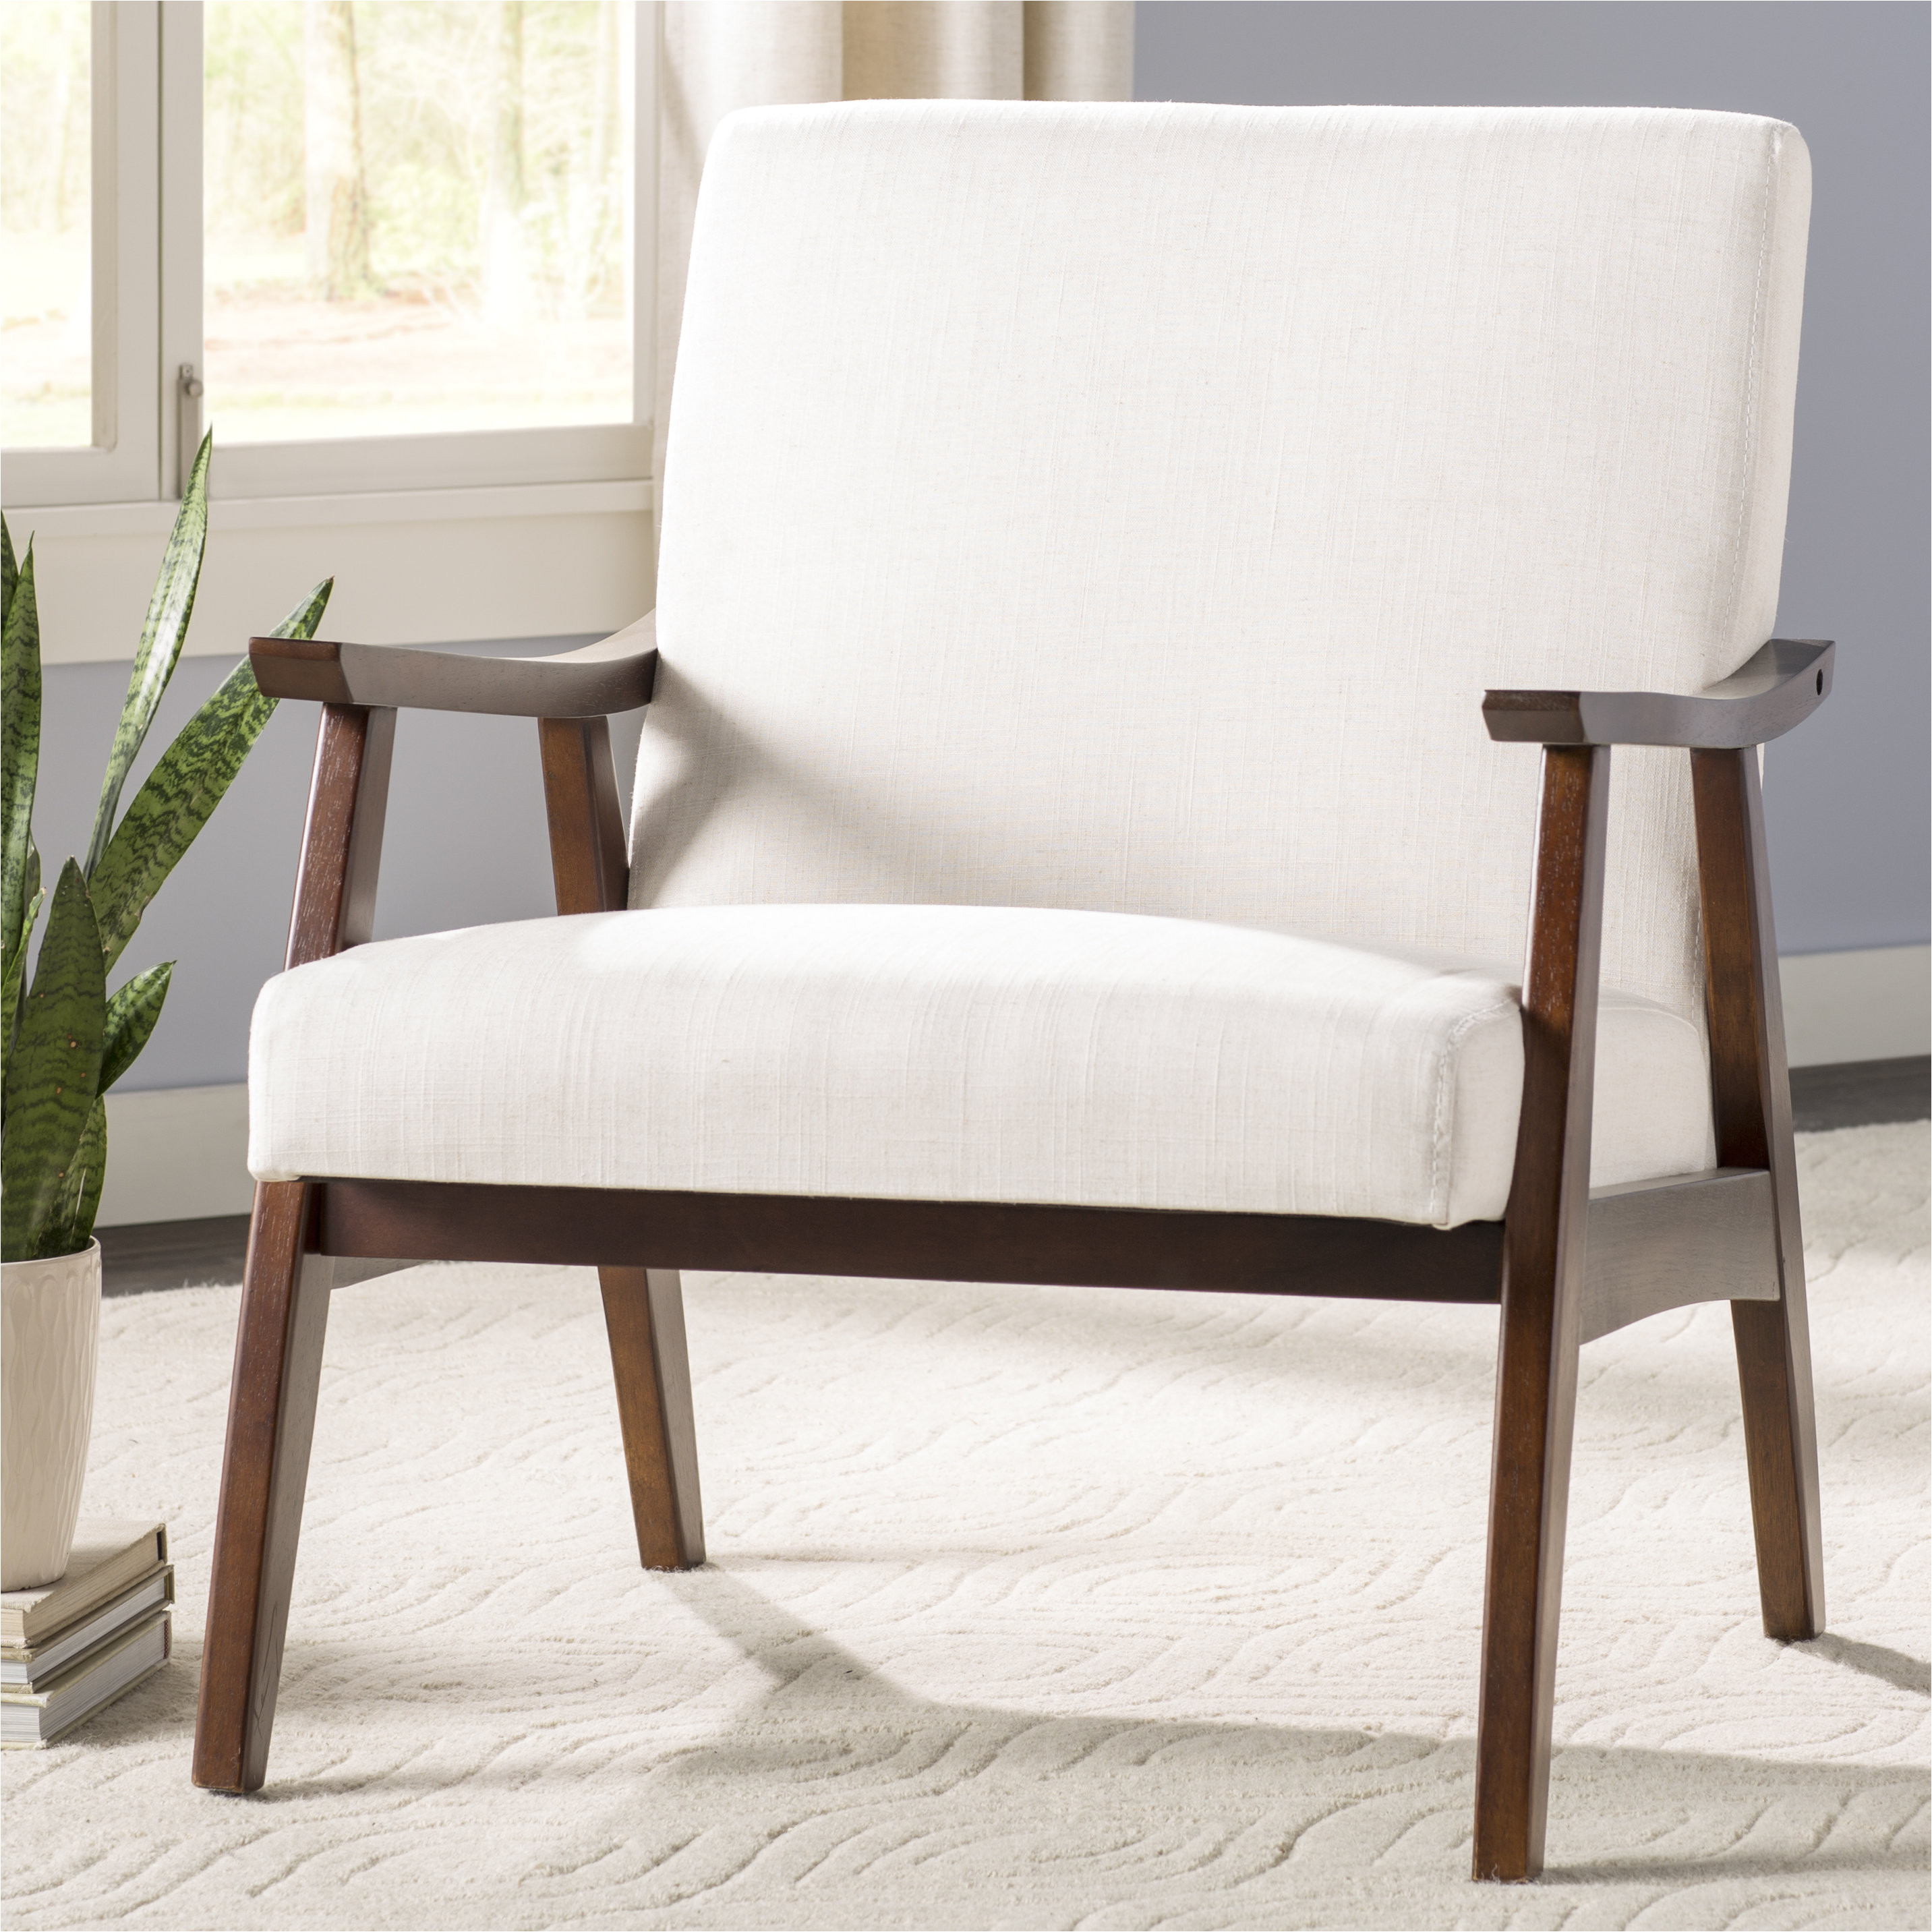 Cheap accent chairs uk